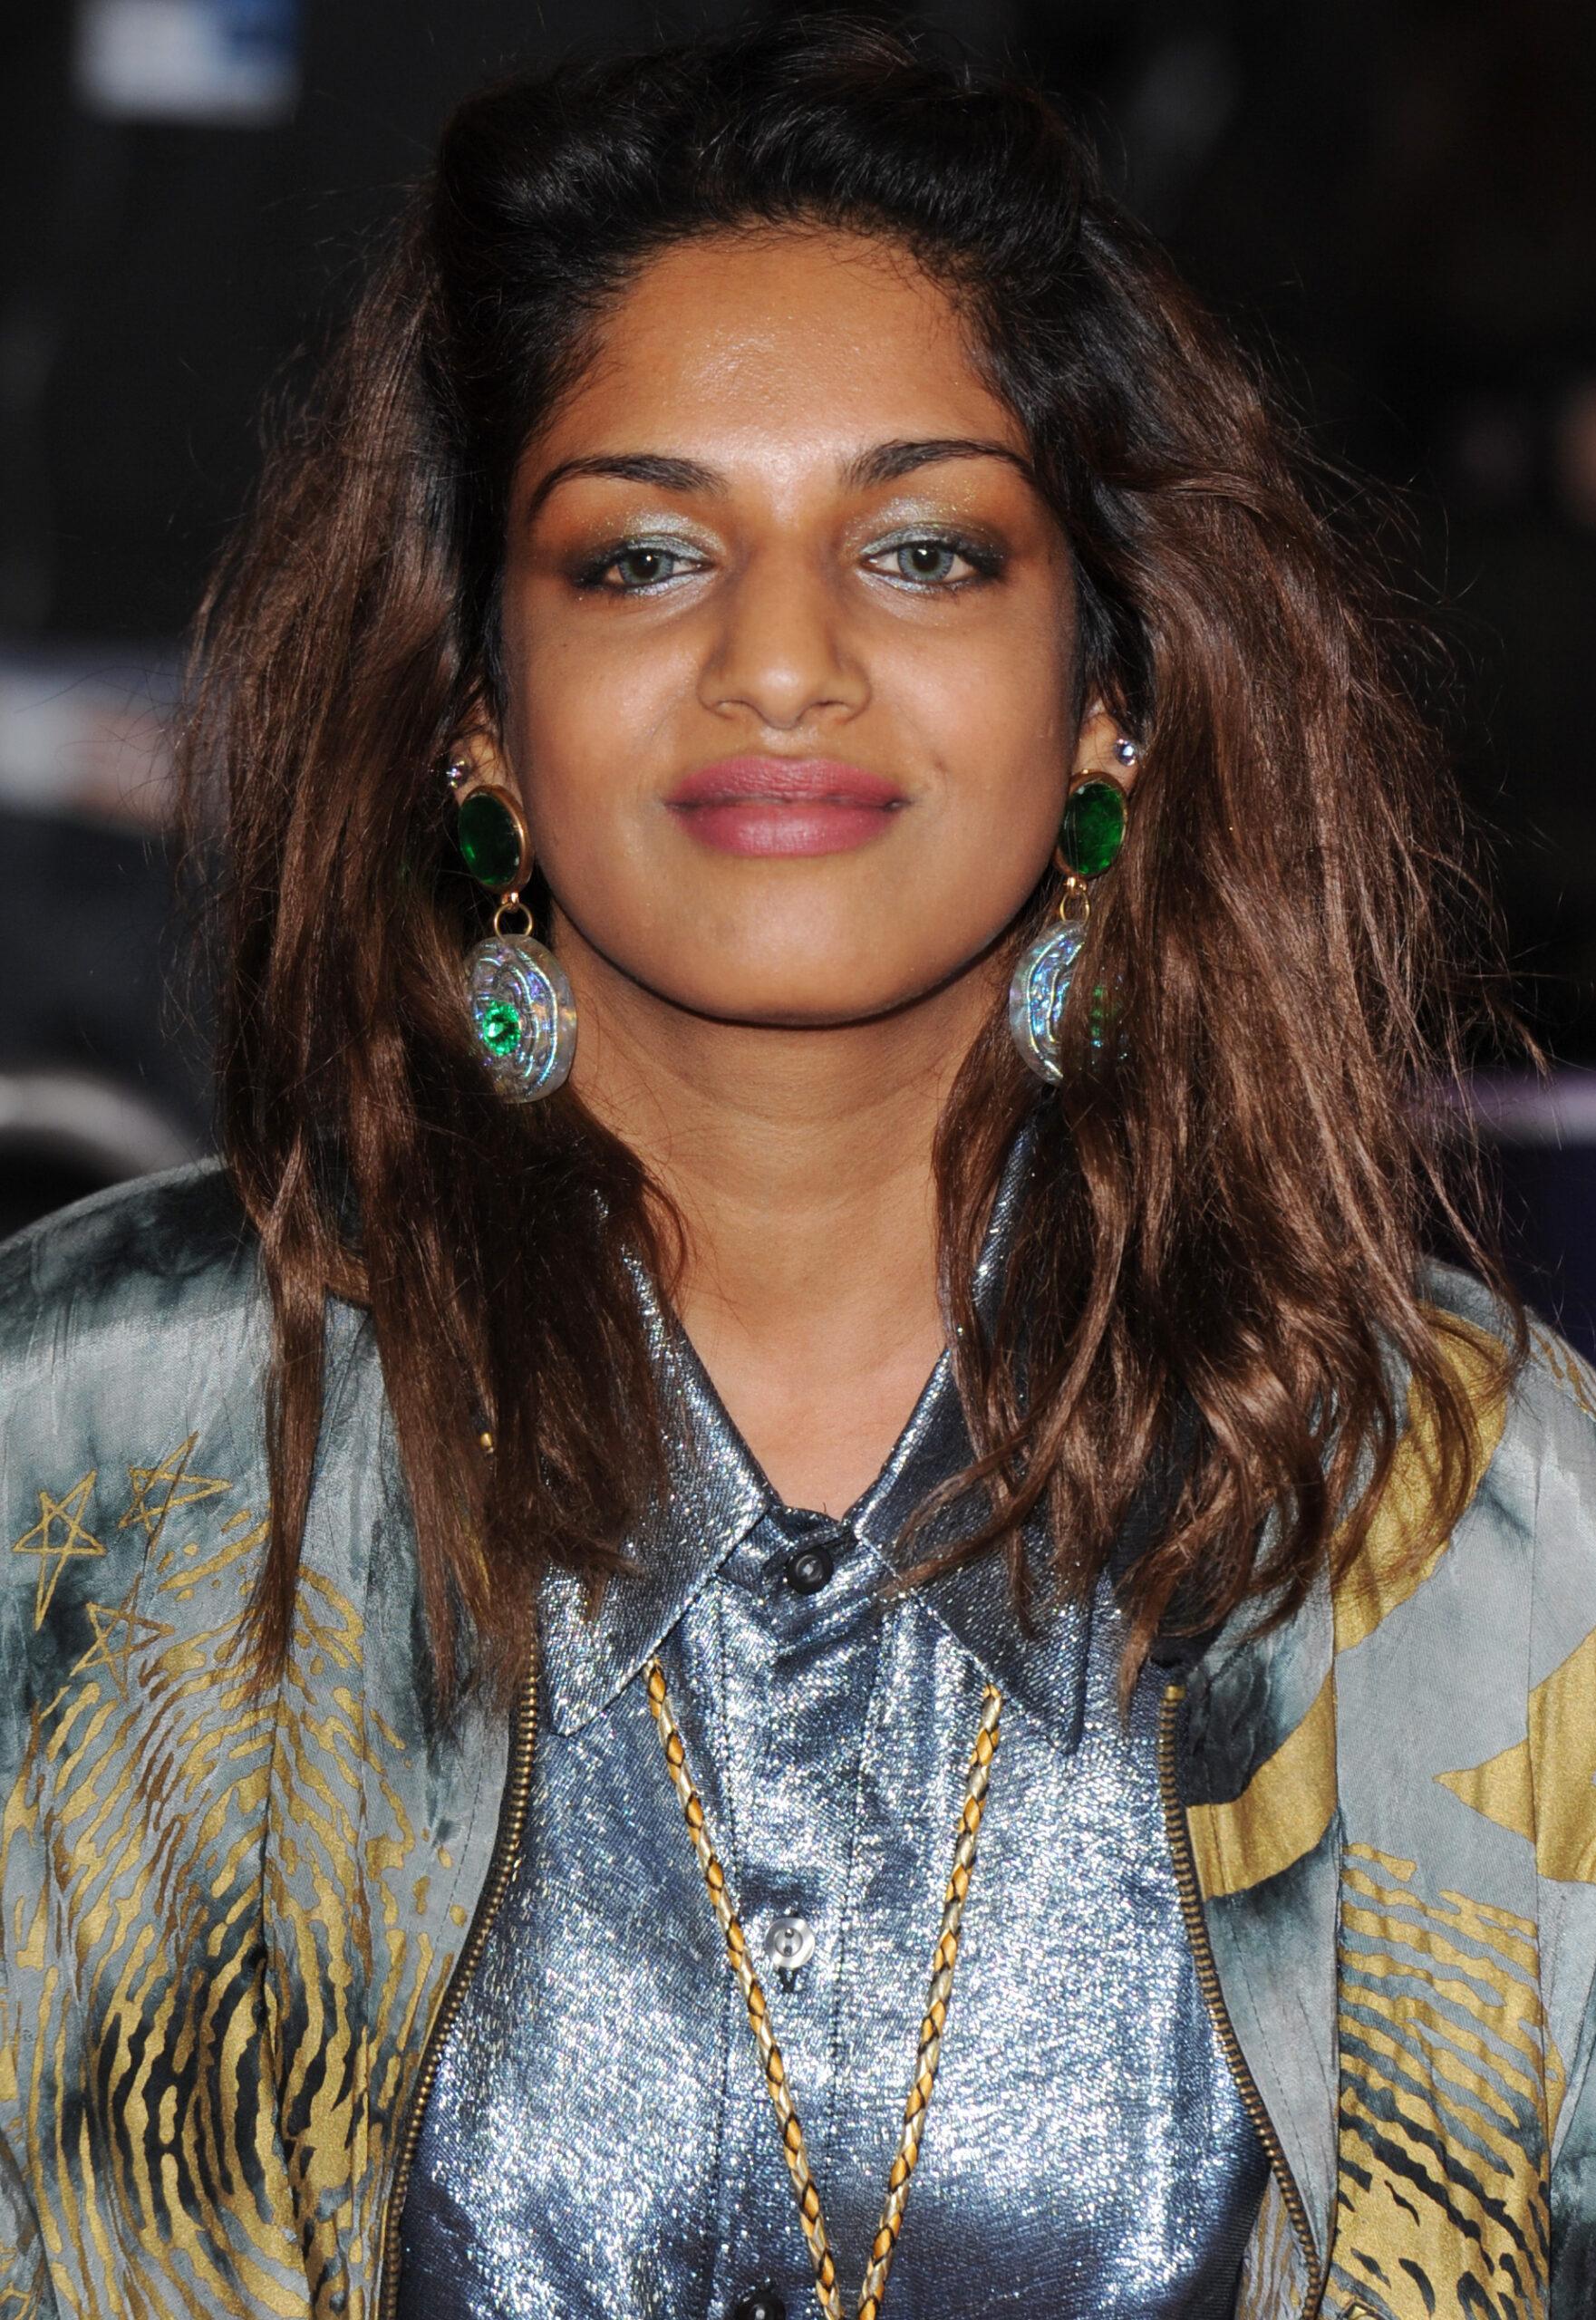 M.I.A. Puzzled By Backlash Over Her 'Jesus Is Real' Remark